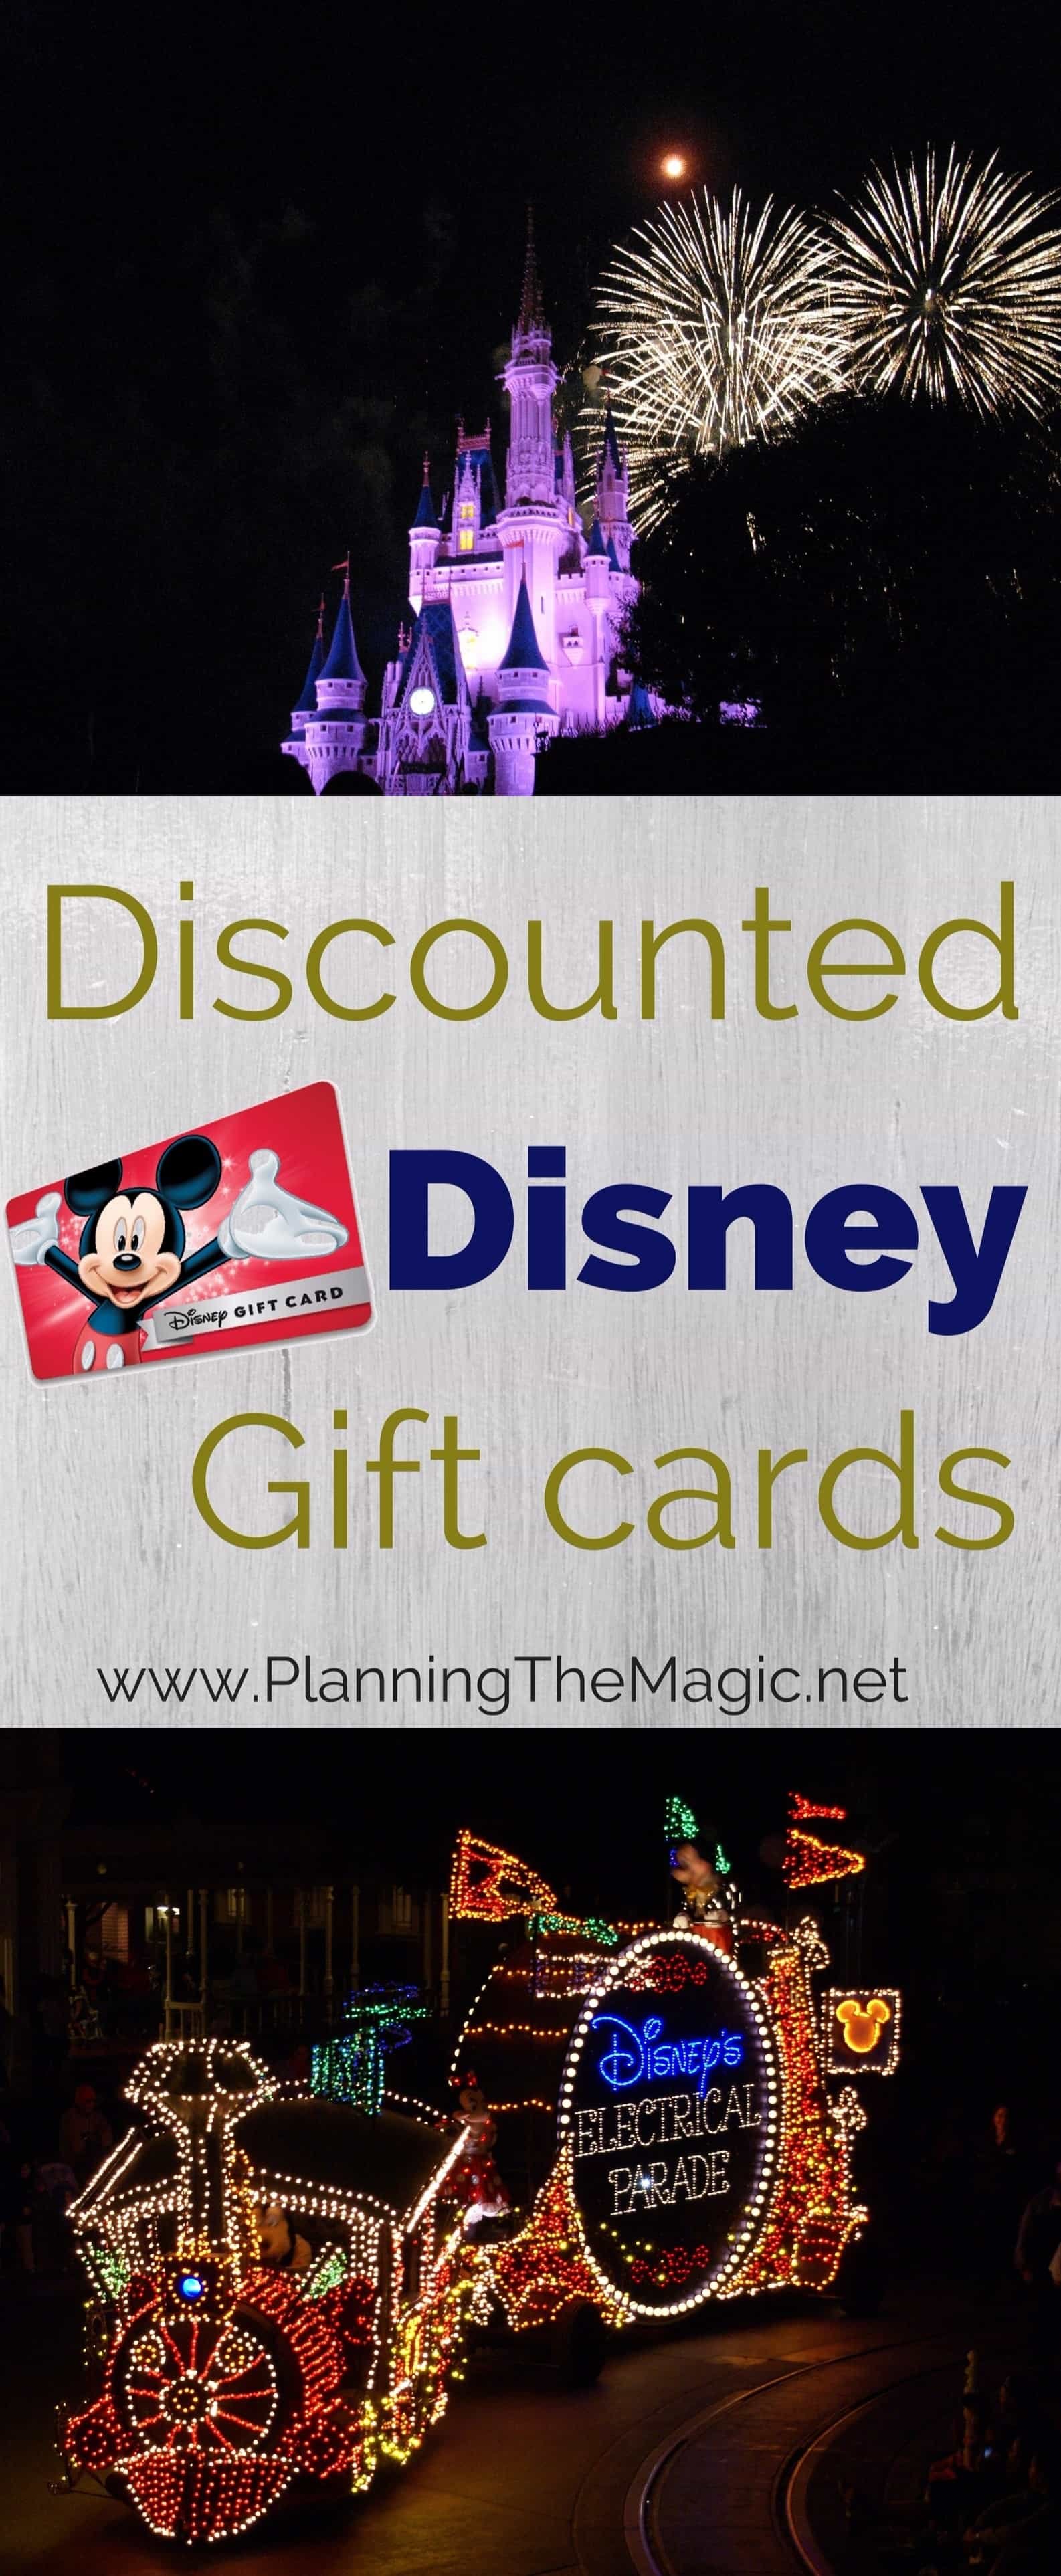 discounted disney gift cards-min